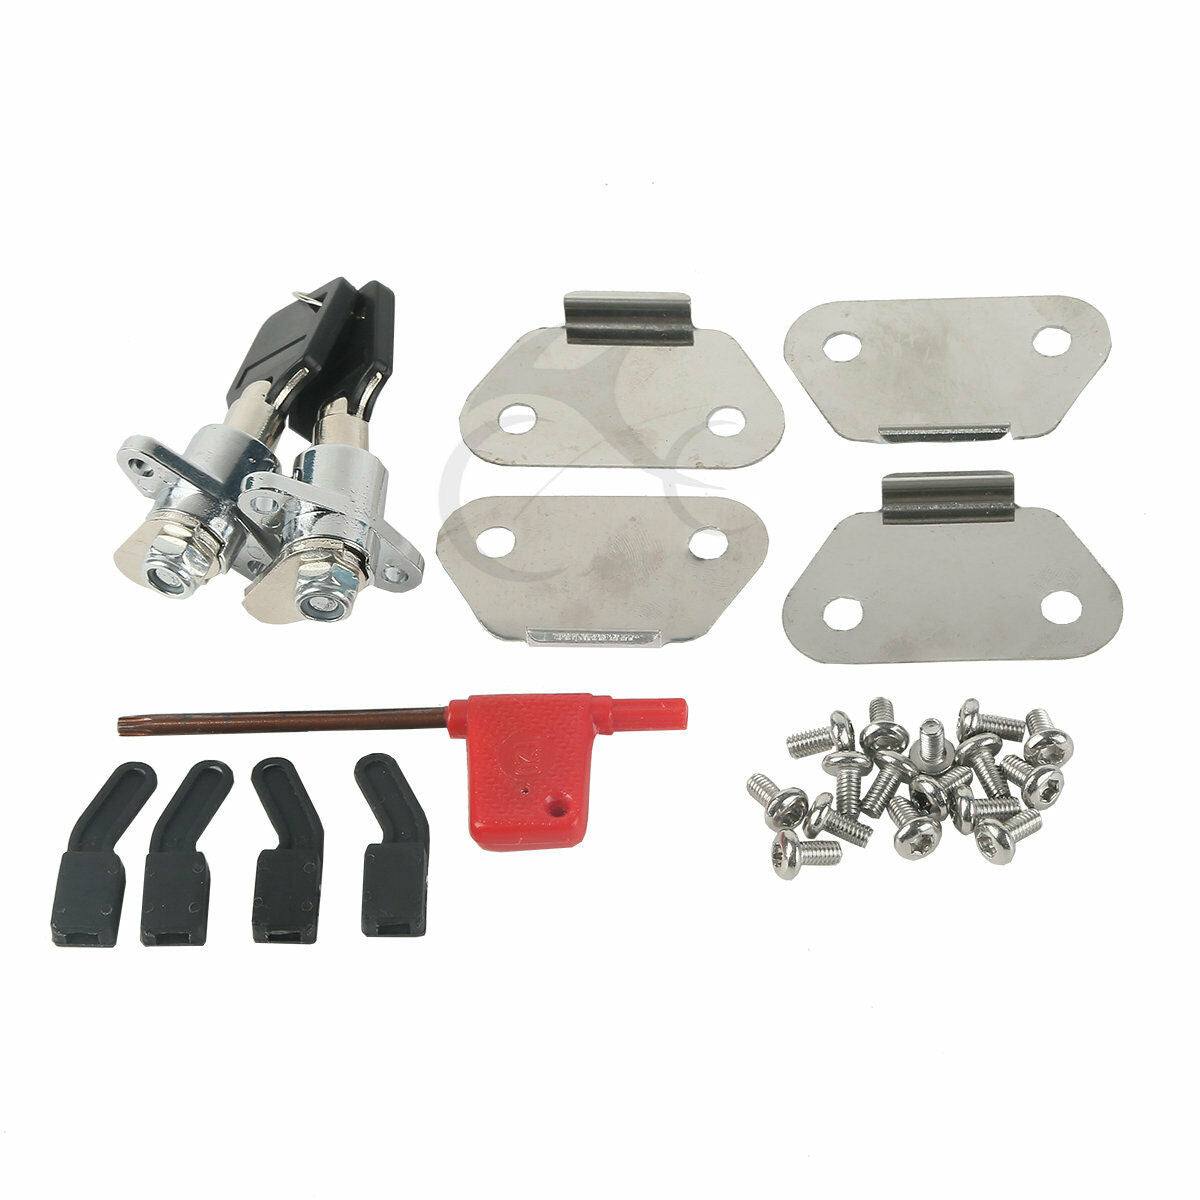 Saddle Bag Latch Lock Lid Hardware kit Fit For Harley Touring Street Glide 93-13 - Moto Life Products